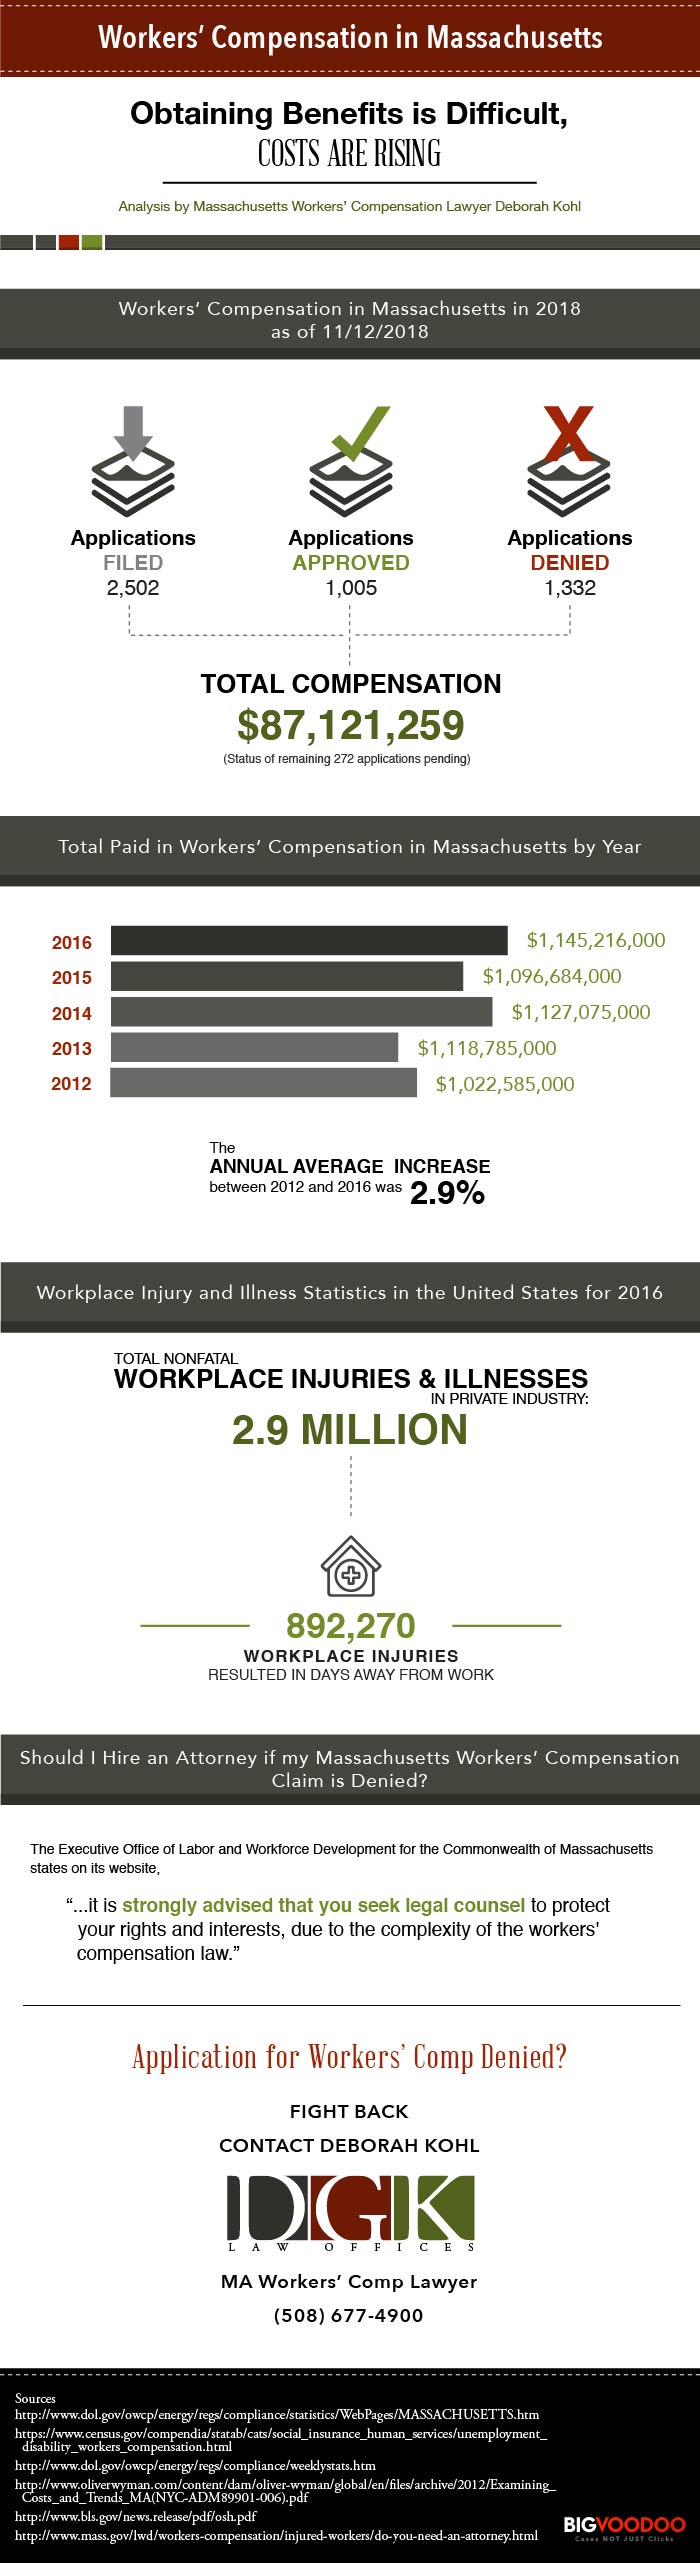 Workers' Compensation Infographic